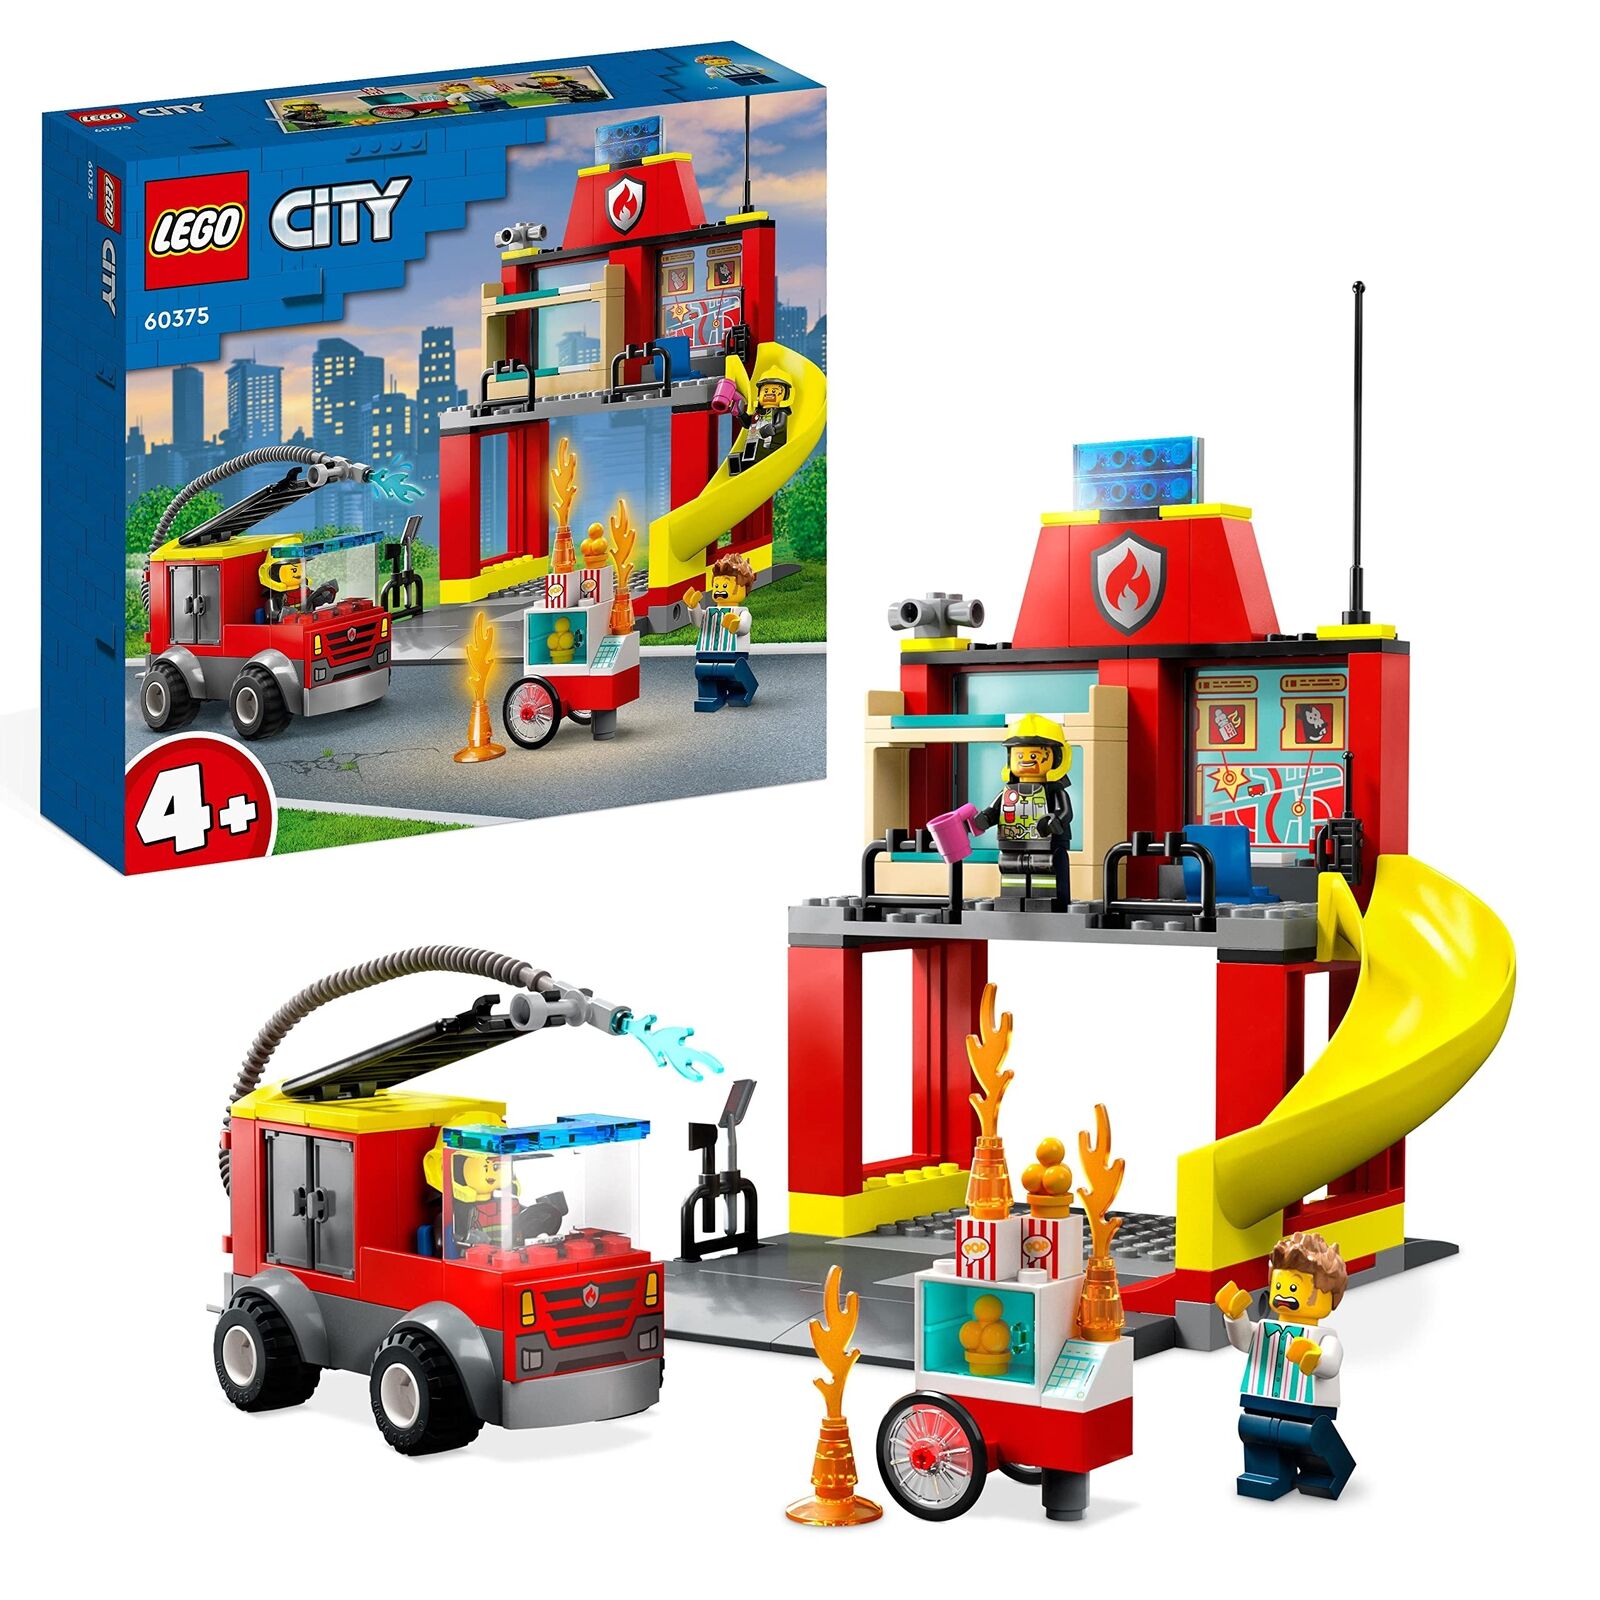 LEGO 60375 City Fire Station and Fire Engine Learning Toys for Kids 4 Plus Years